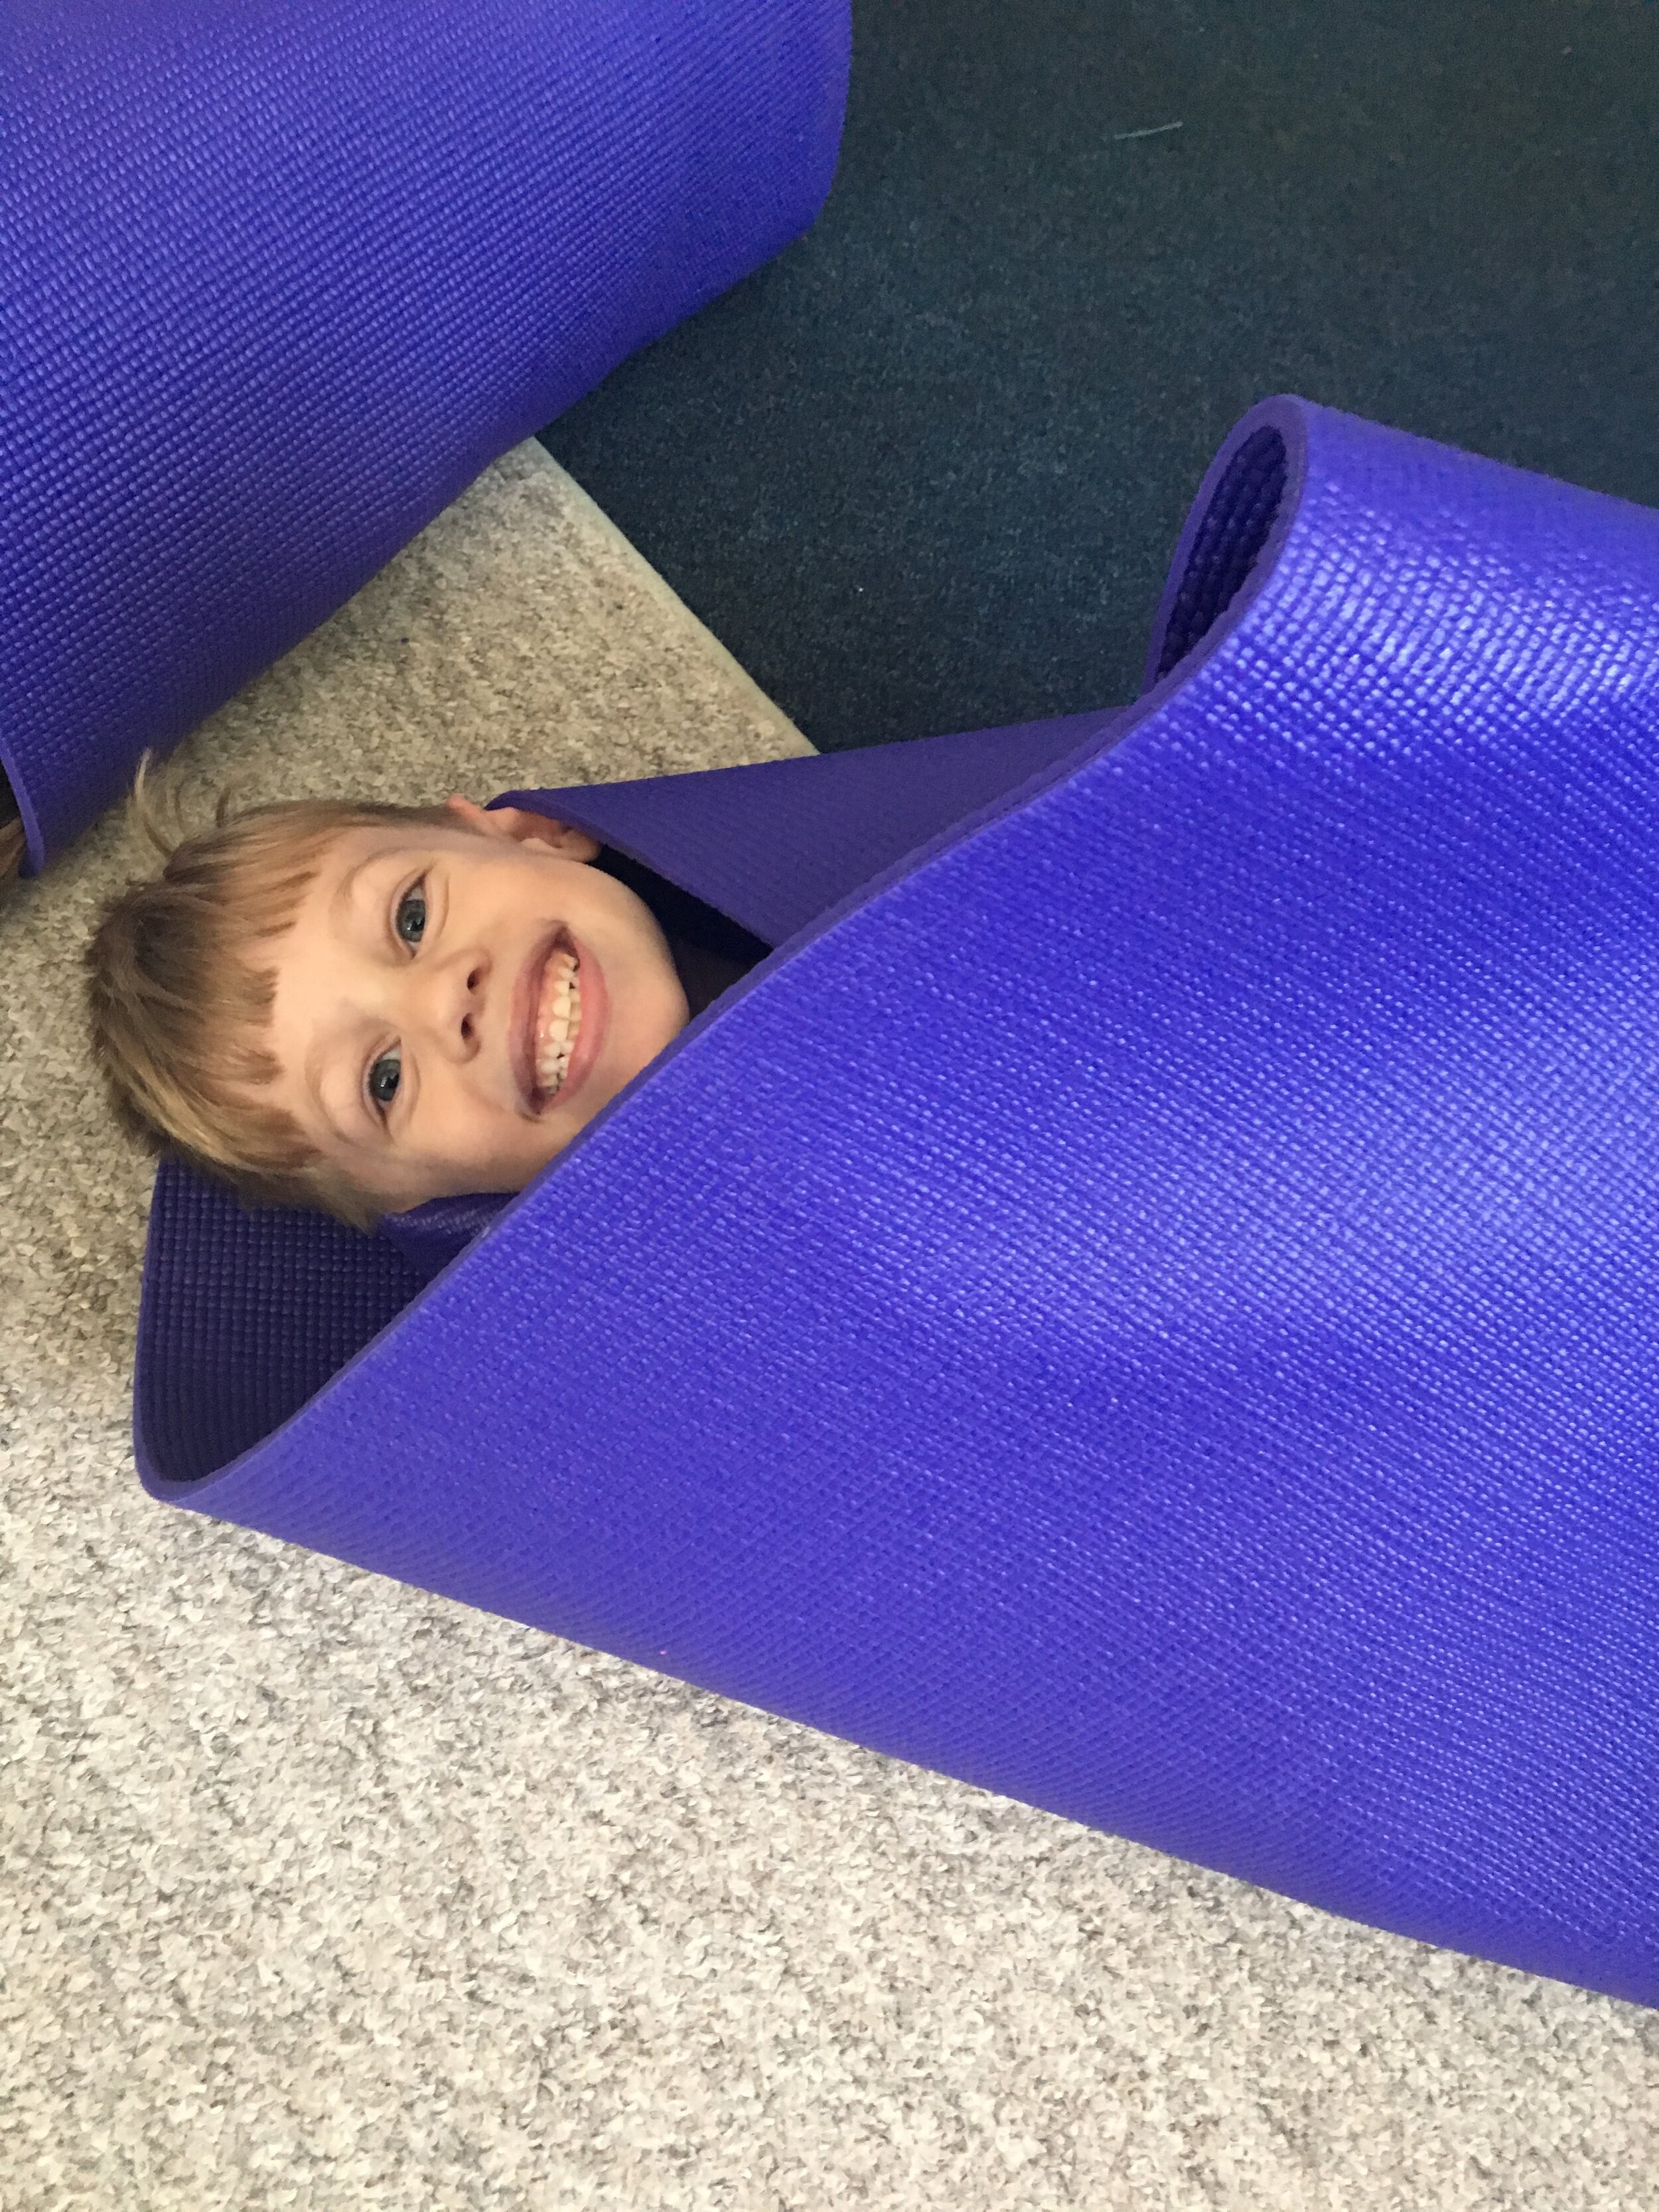 deep pressure therapy — The Yoga Buggy: Bringing yoga to all kids